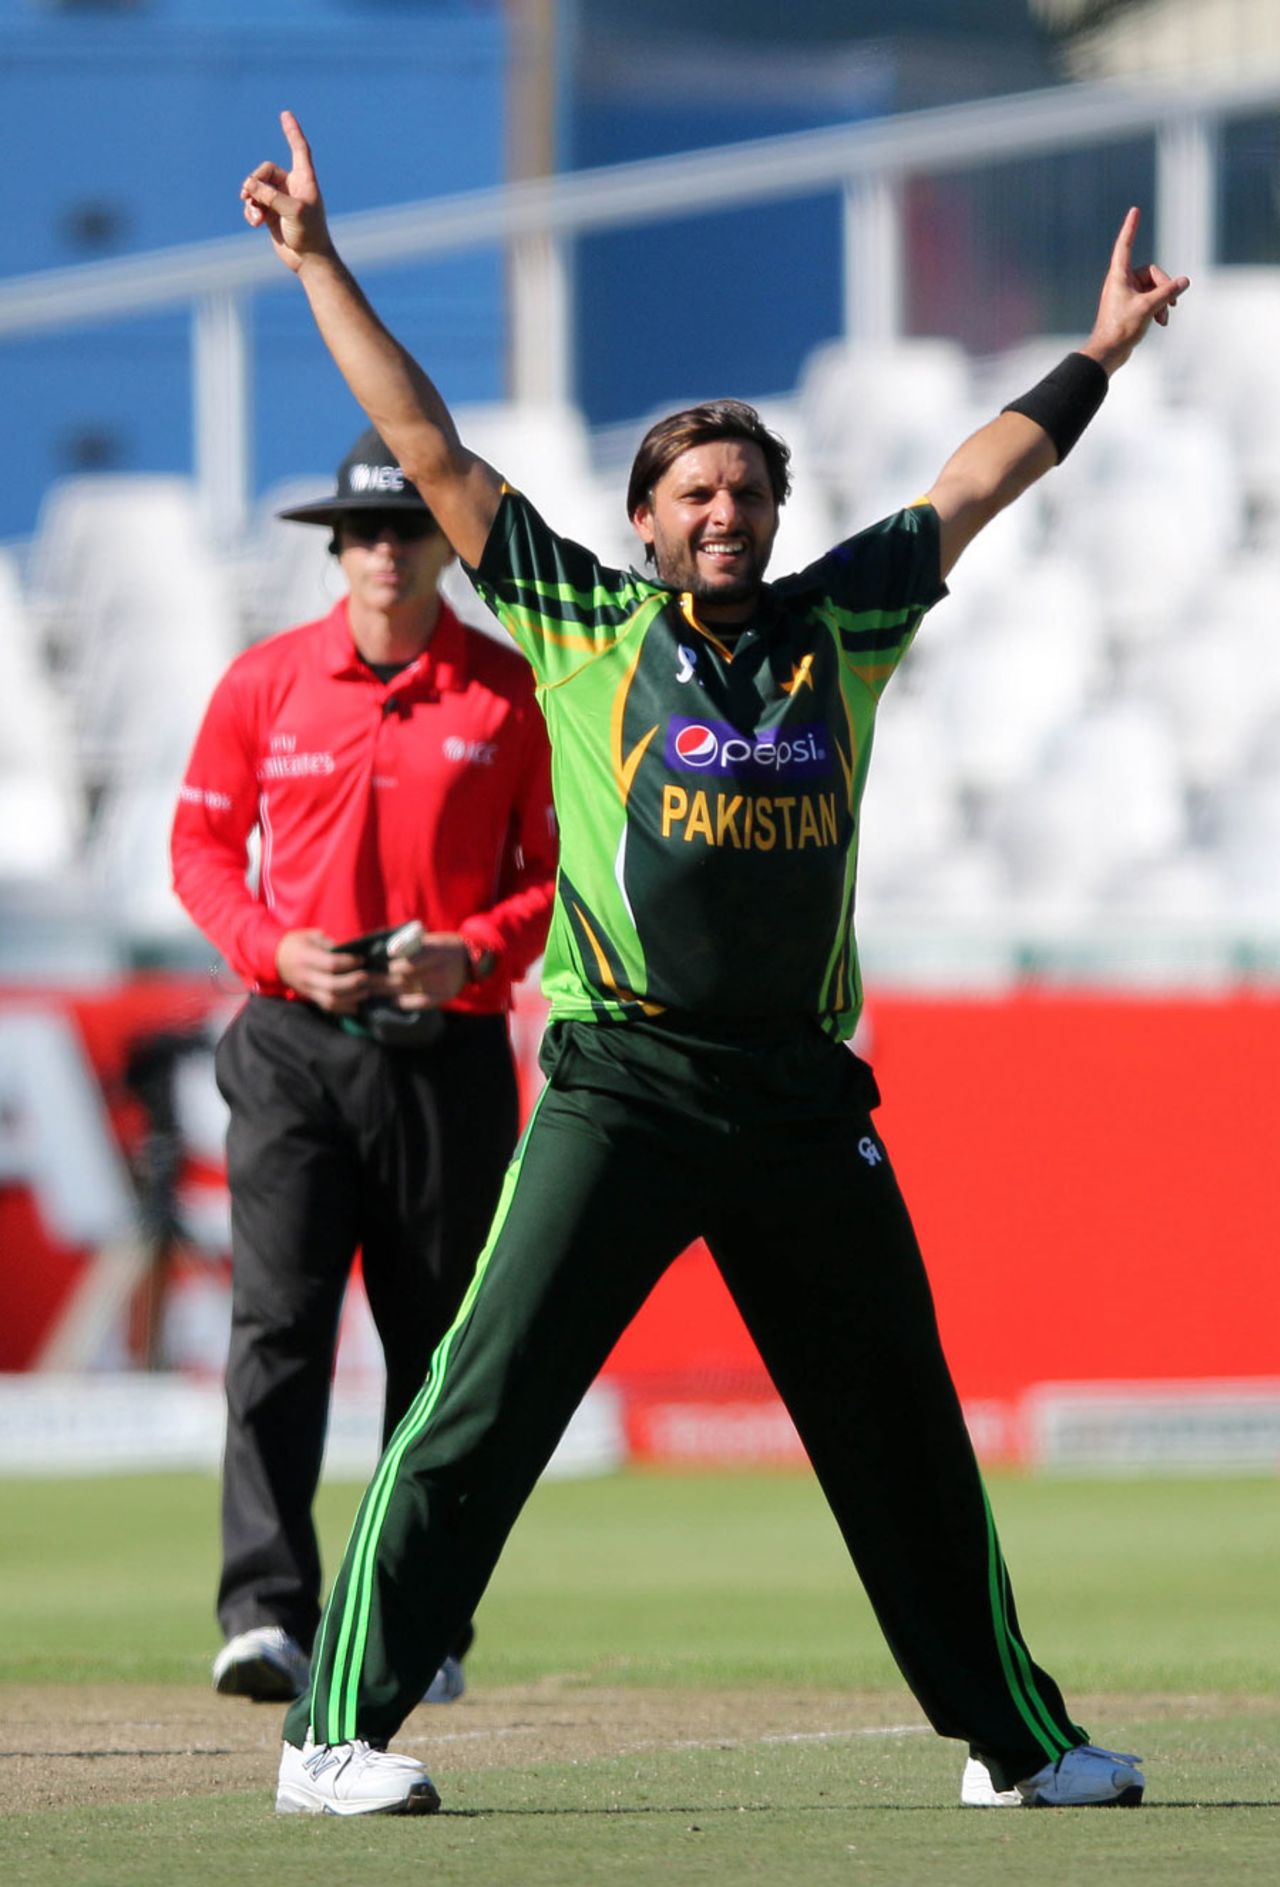 Shahid Afridi picked up the crucial wicket of AB de Villiers, South Africa v Pakistan, 1st ODI, Cape Town, November 24, 2013